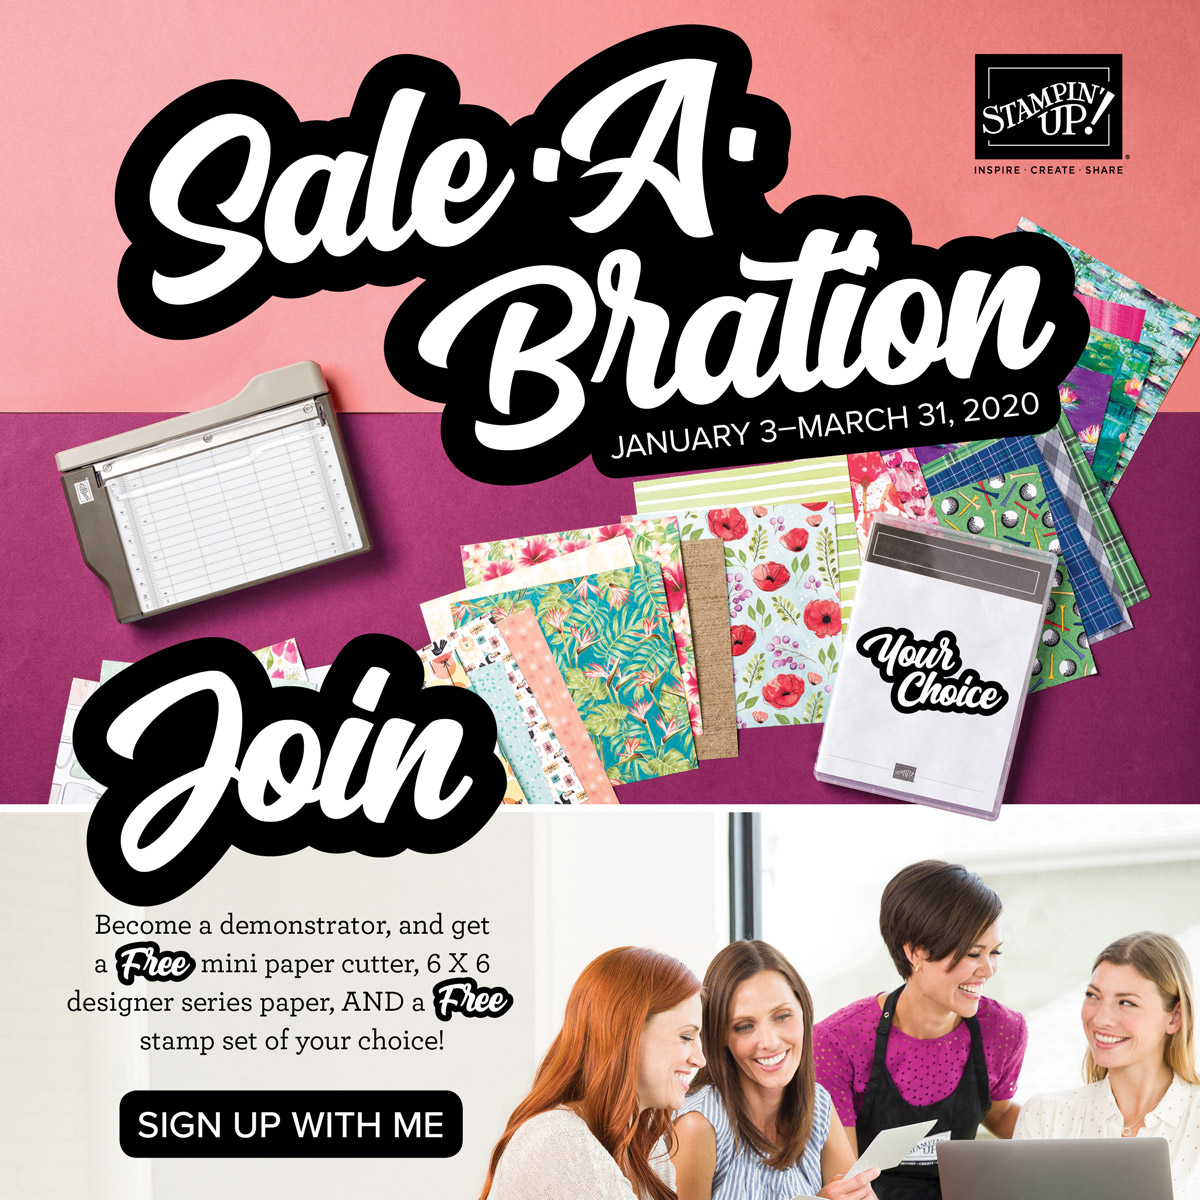 join my Stampin' Up! team during Sale-a-bration and get even more great products in your Starter Kit! Details on my blog here: https://wp.me/p59VWq-aF6